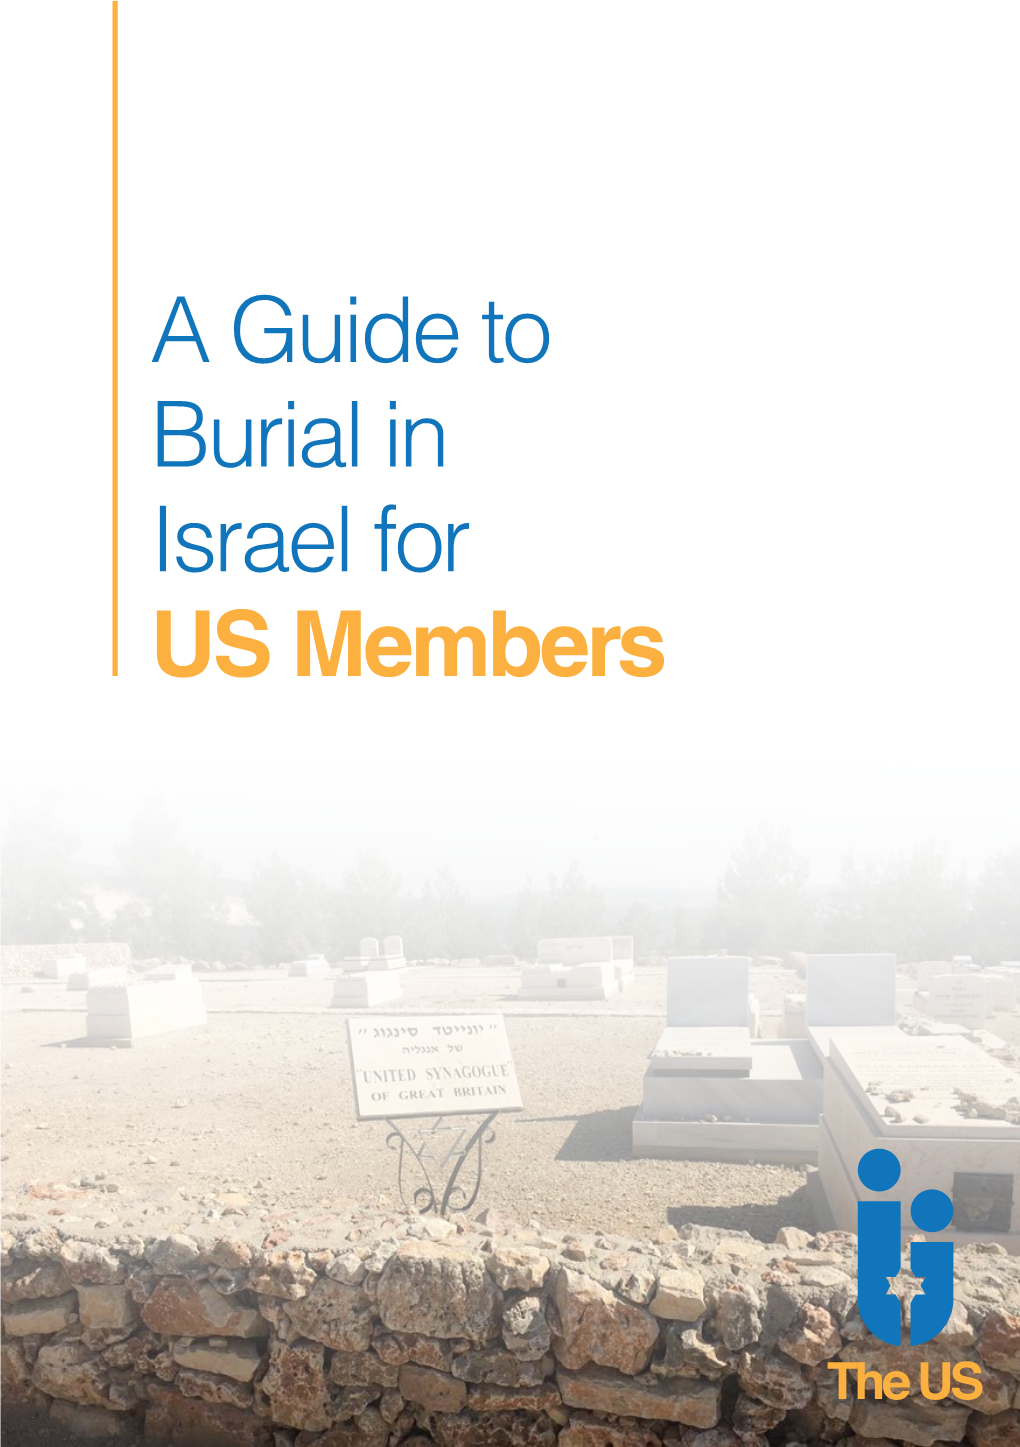 A Guide to Burial in Israel for US Members